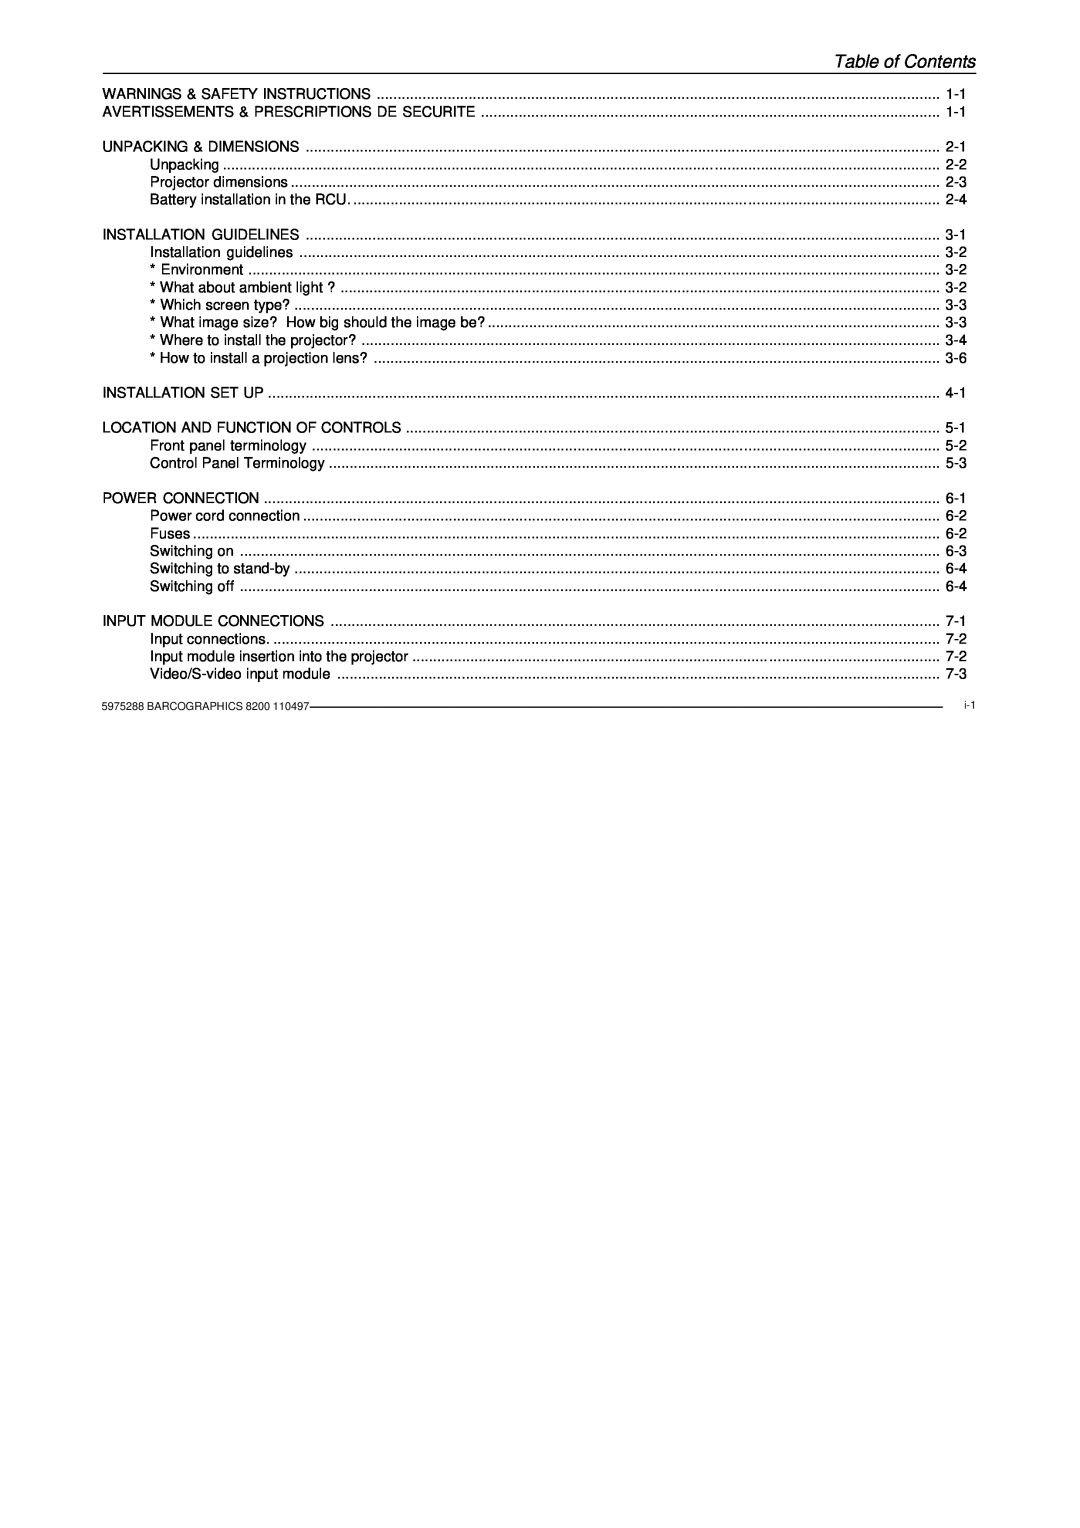 Barco R9001330 owner manual Table of Contents 